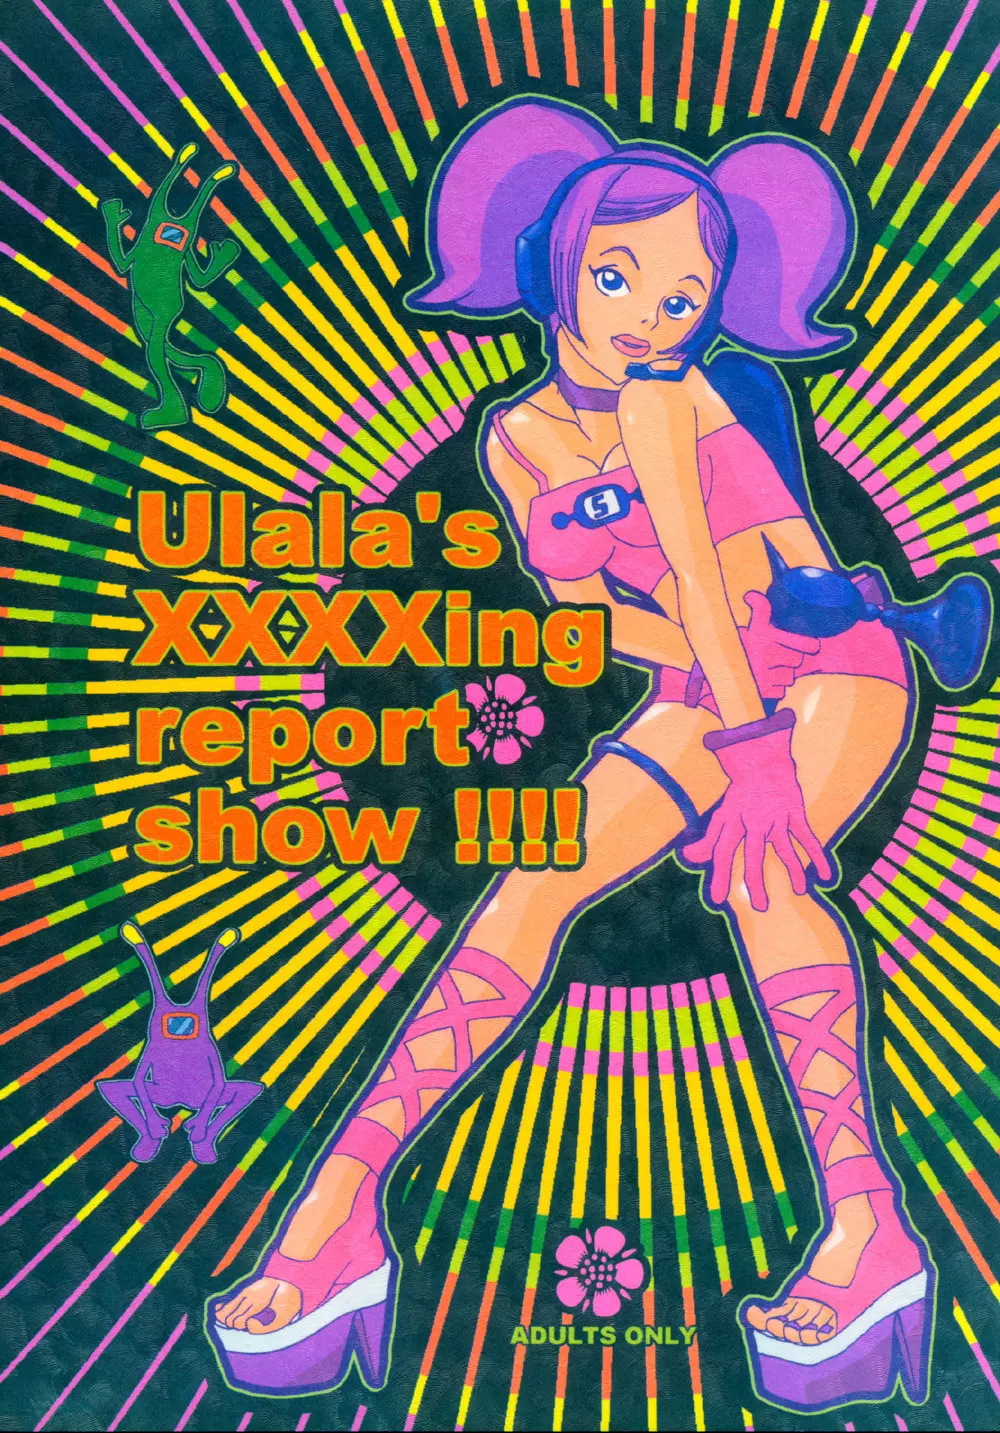 Ulala's XXXXing Report Show!!!! Page.1